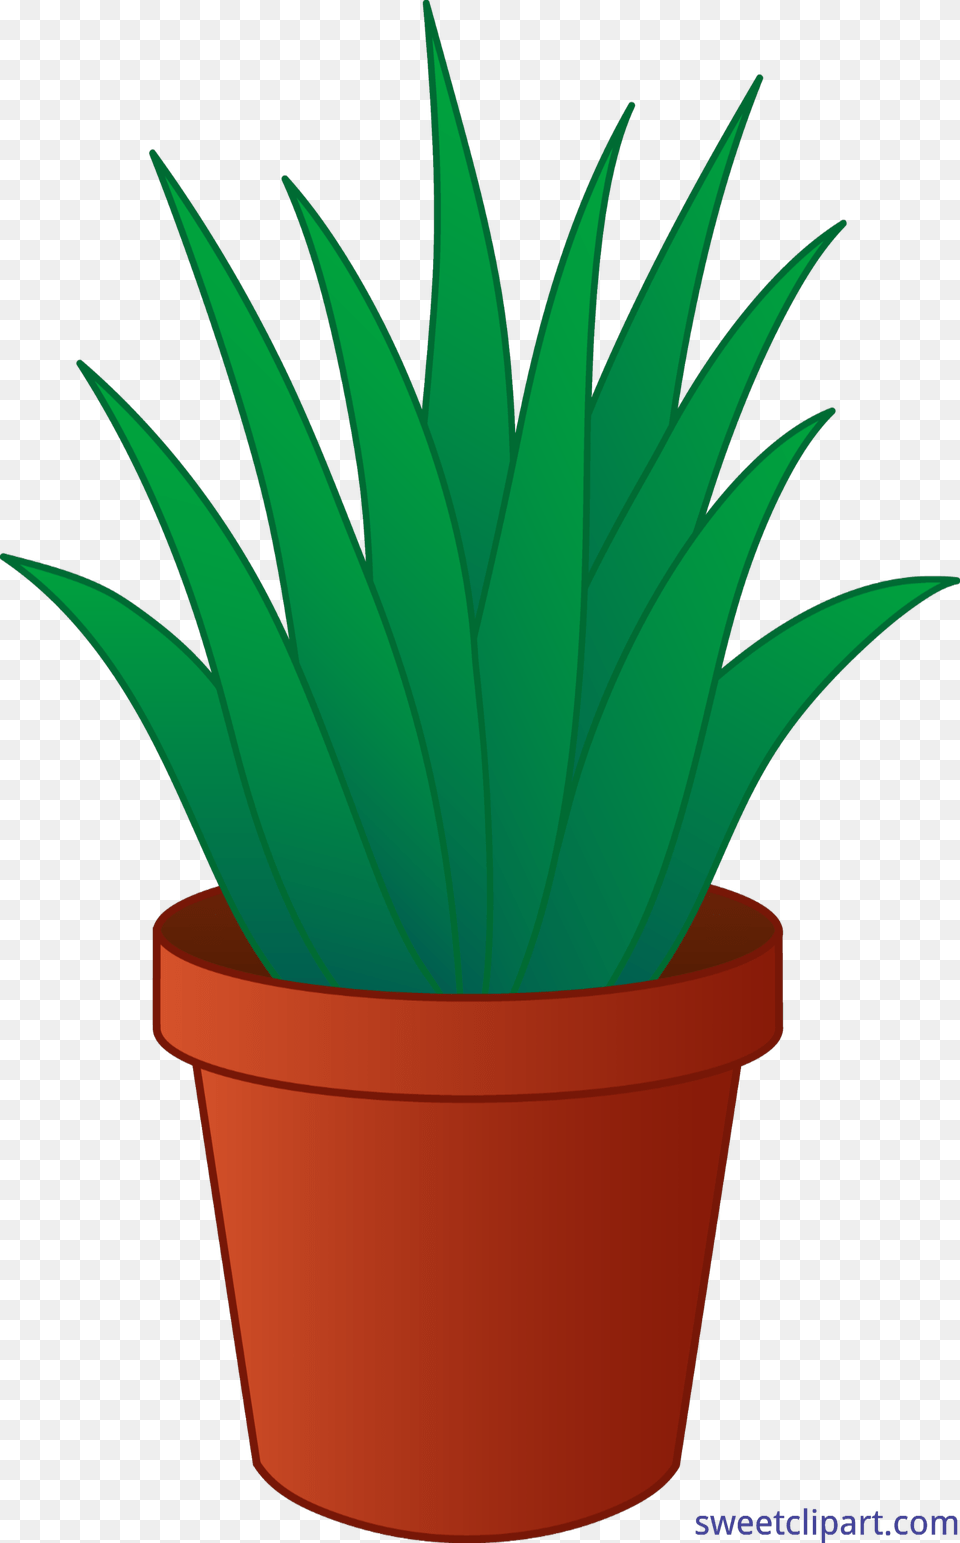 Pot Drawing At Getdrawings, Plant, Potted Plant, Aloe, Leaf Free Png Download